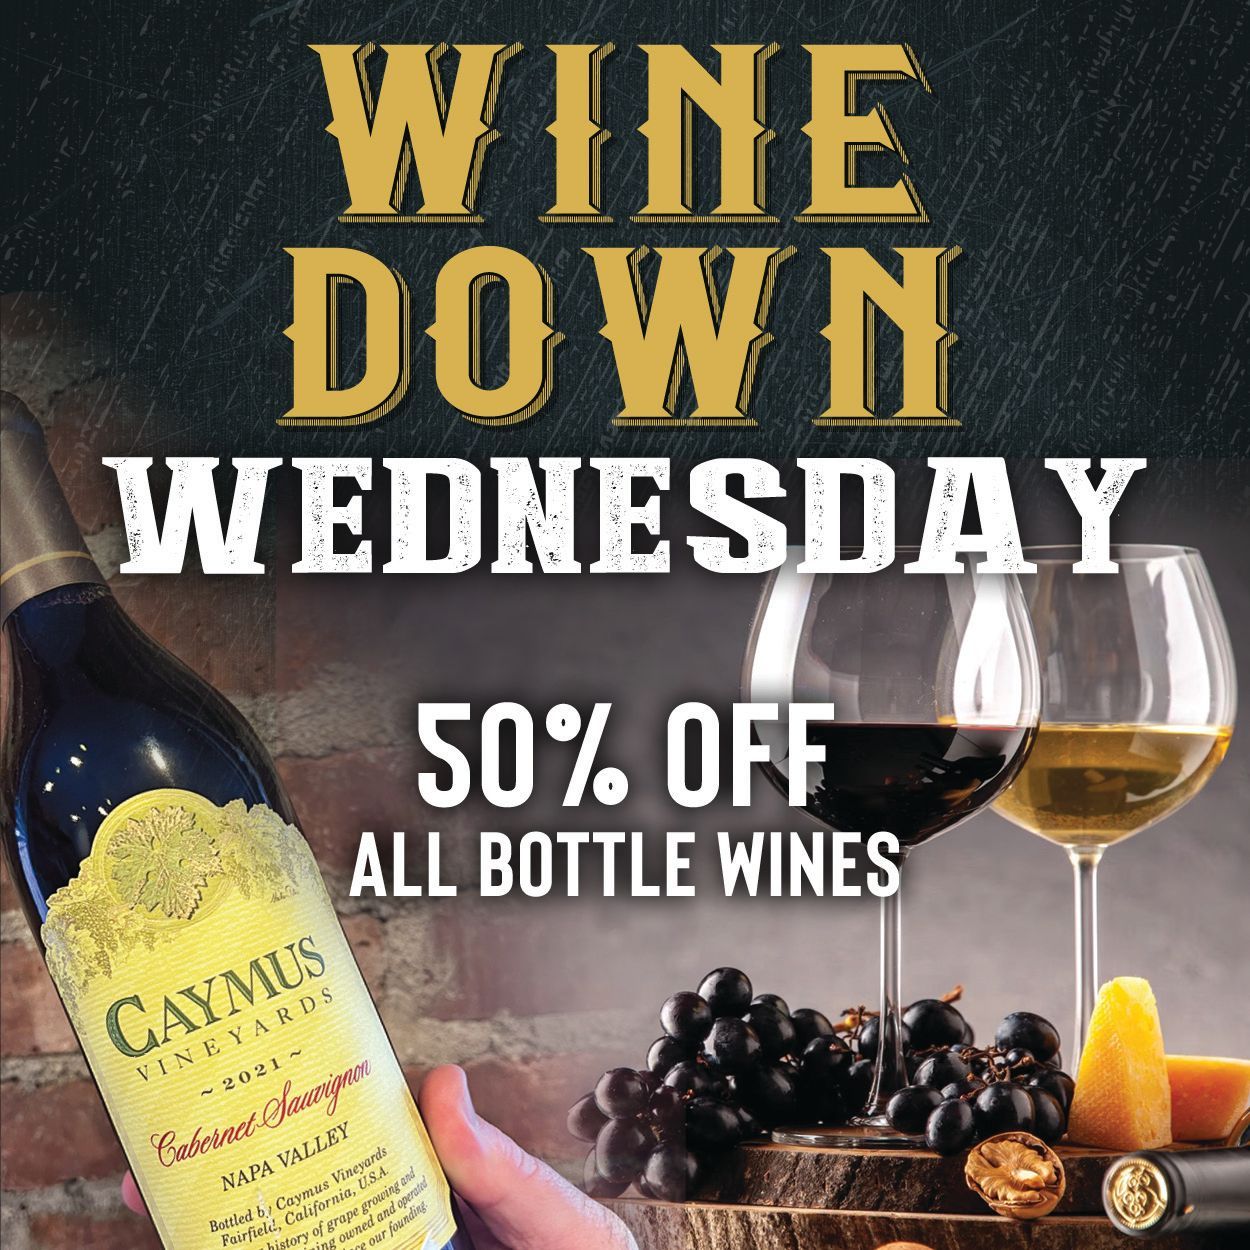 a fkyer for wednesday wine down 50% off all bottles